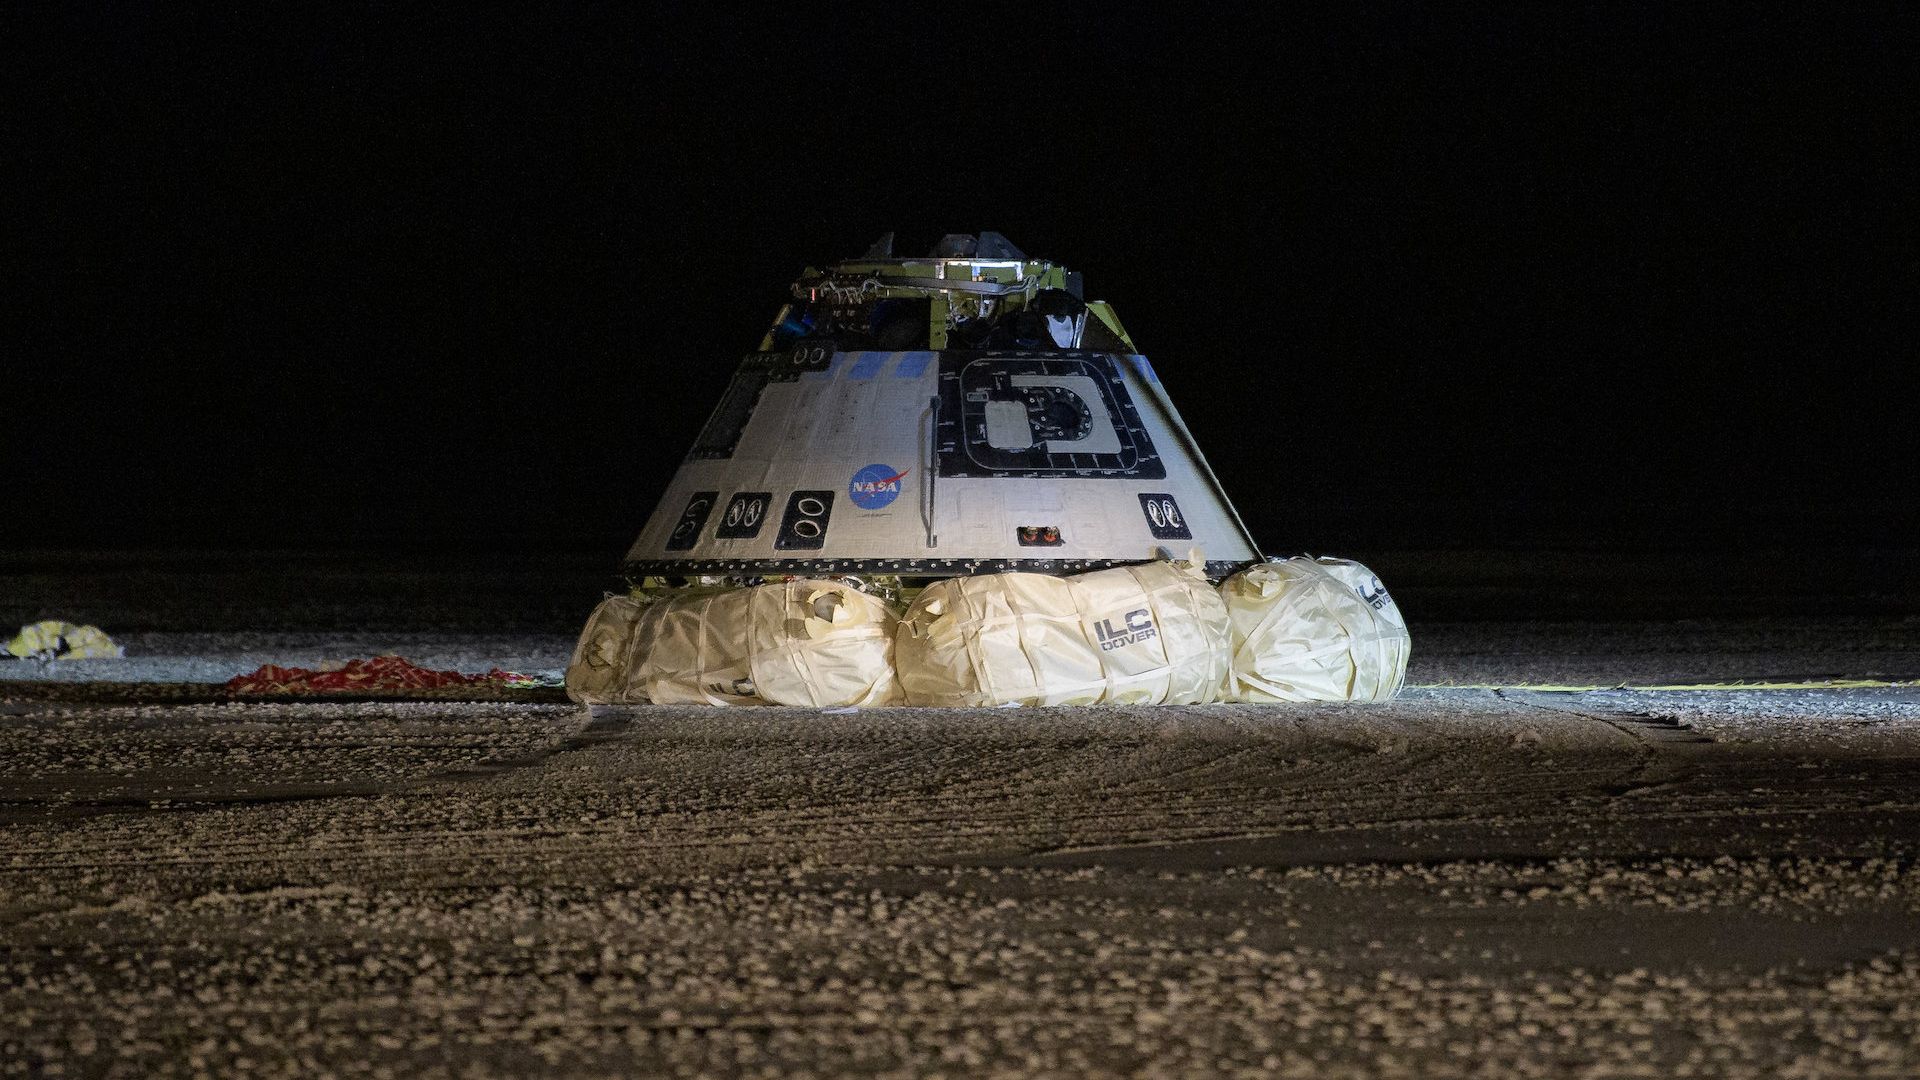 Boeing's Starliner back on the ground in the dark after landing on Earth